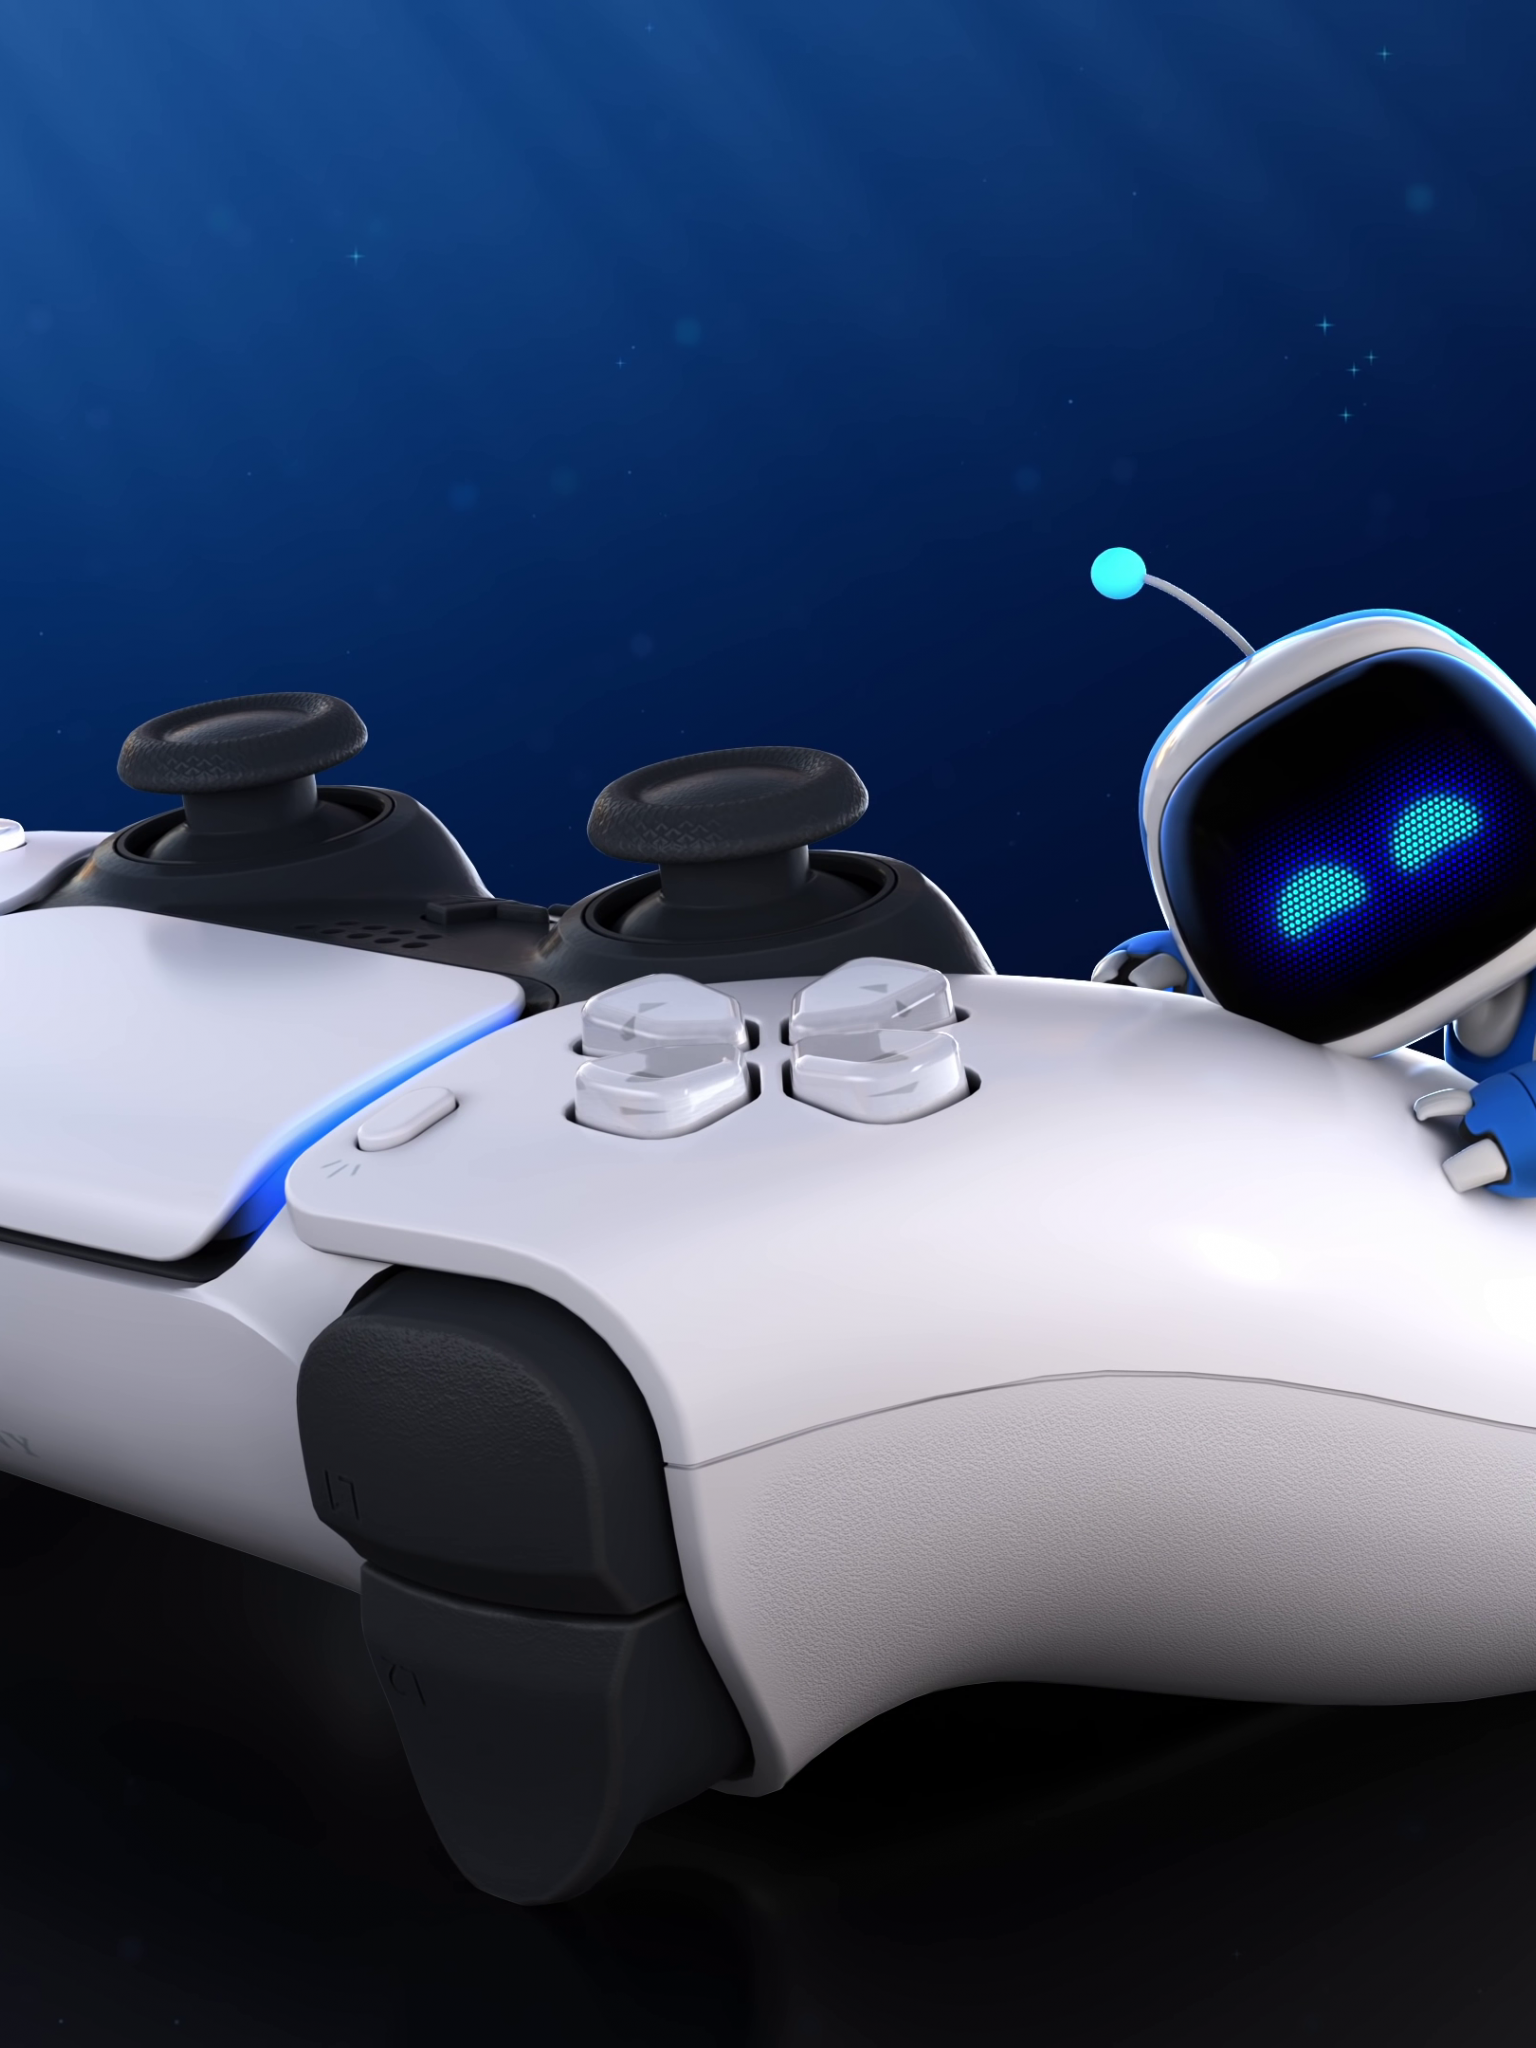 Free download Ps5 Controller HD Picture Wallpaper [3840x2160] for your Desktop, Mobile & Tablet. Explore Playstation 5 Wallpaper. Playstation Wallpaper, Playstation Wallpaper, Cool Playstation Wallpaper